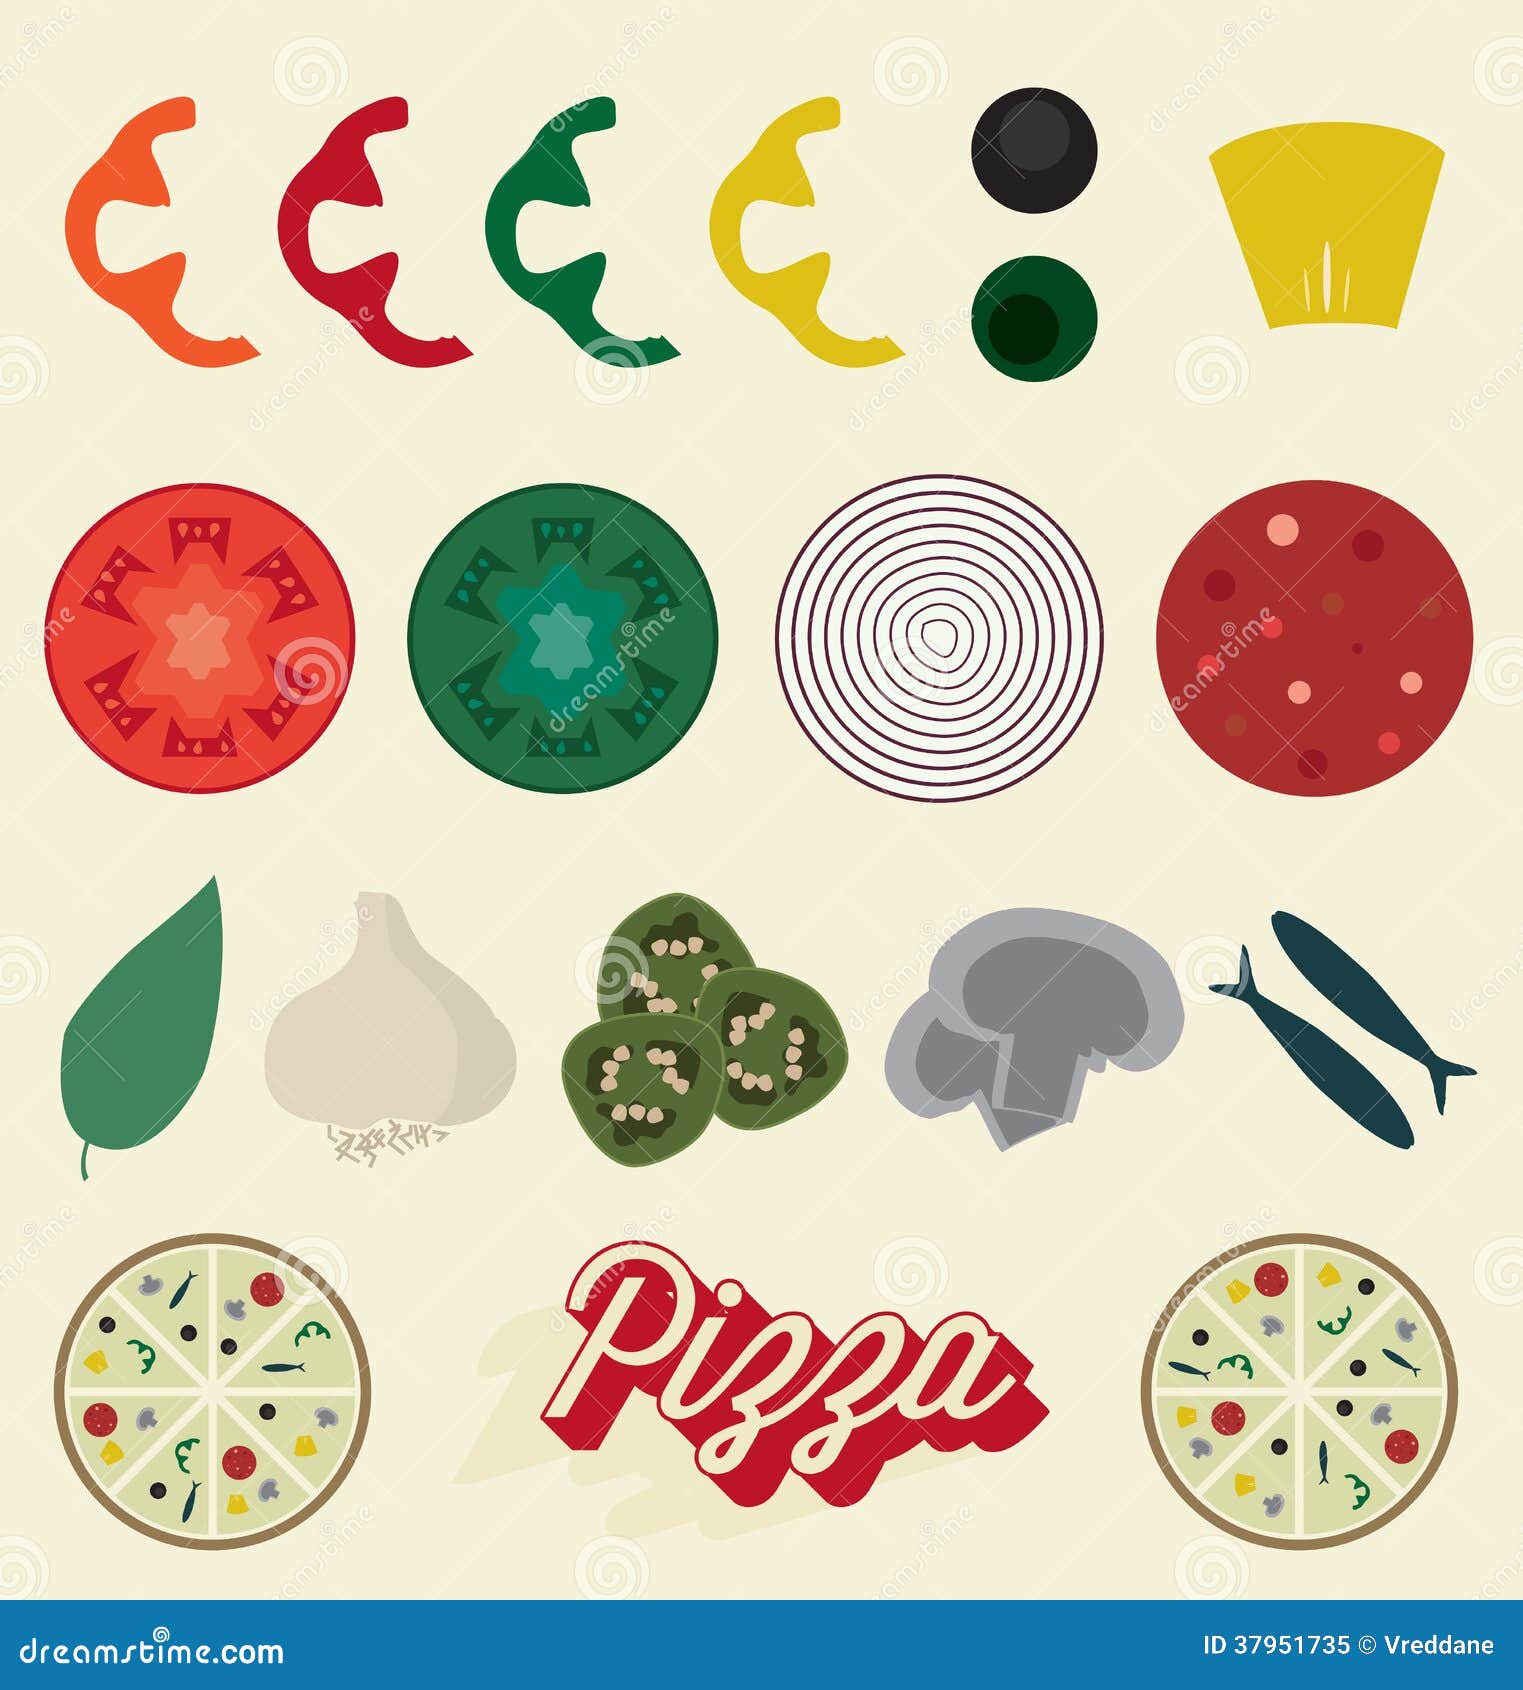 clipart pizza toppings - photo #15